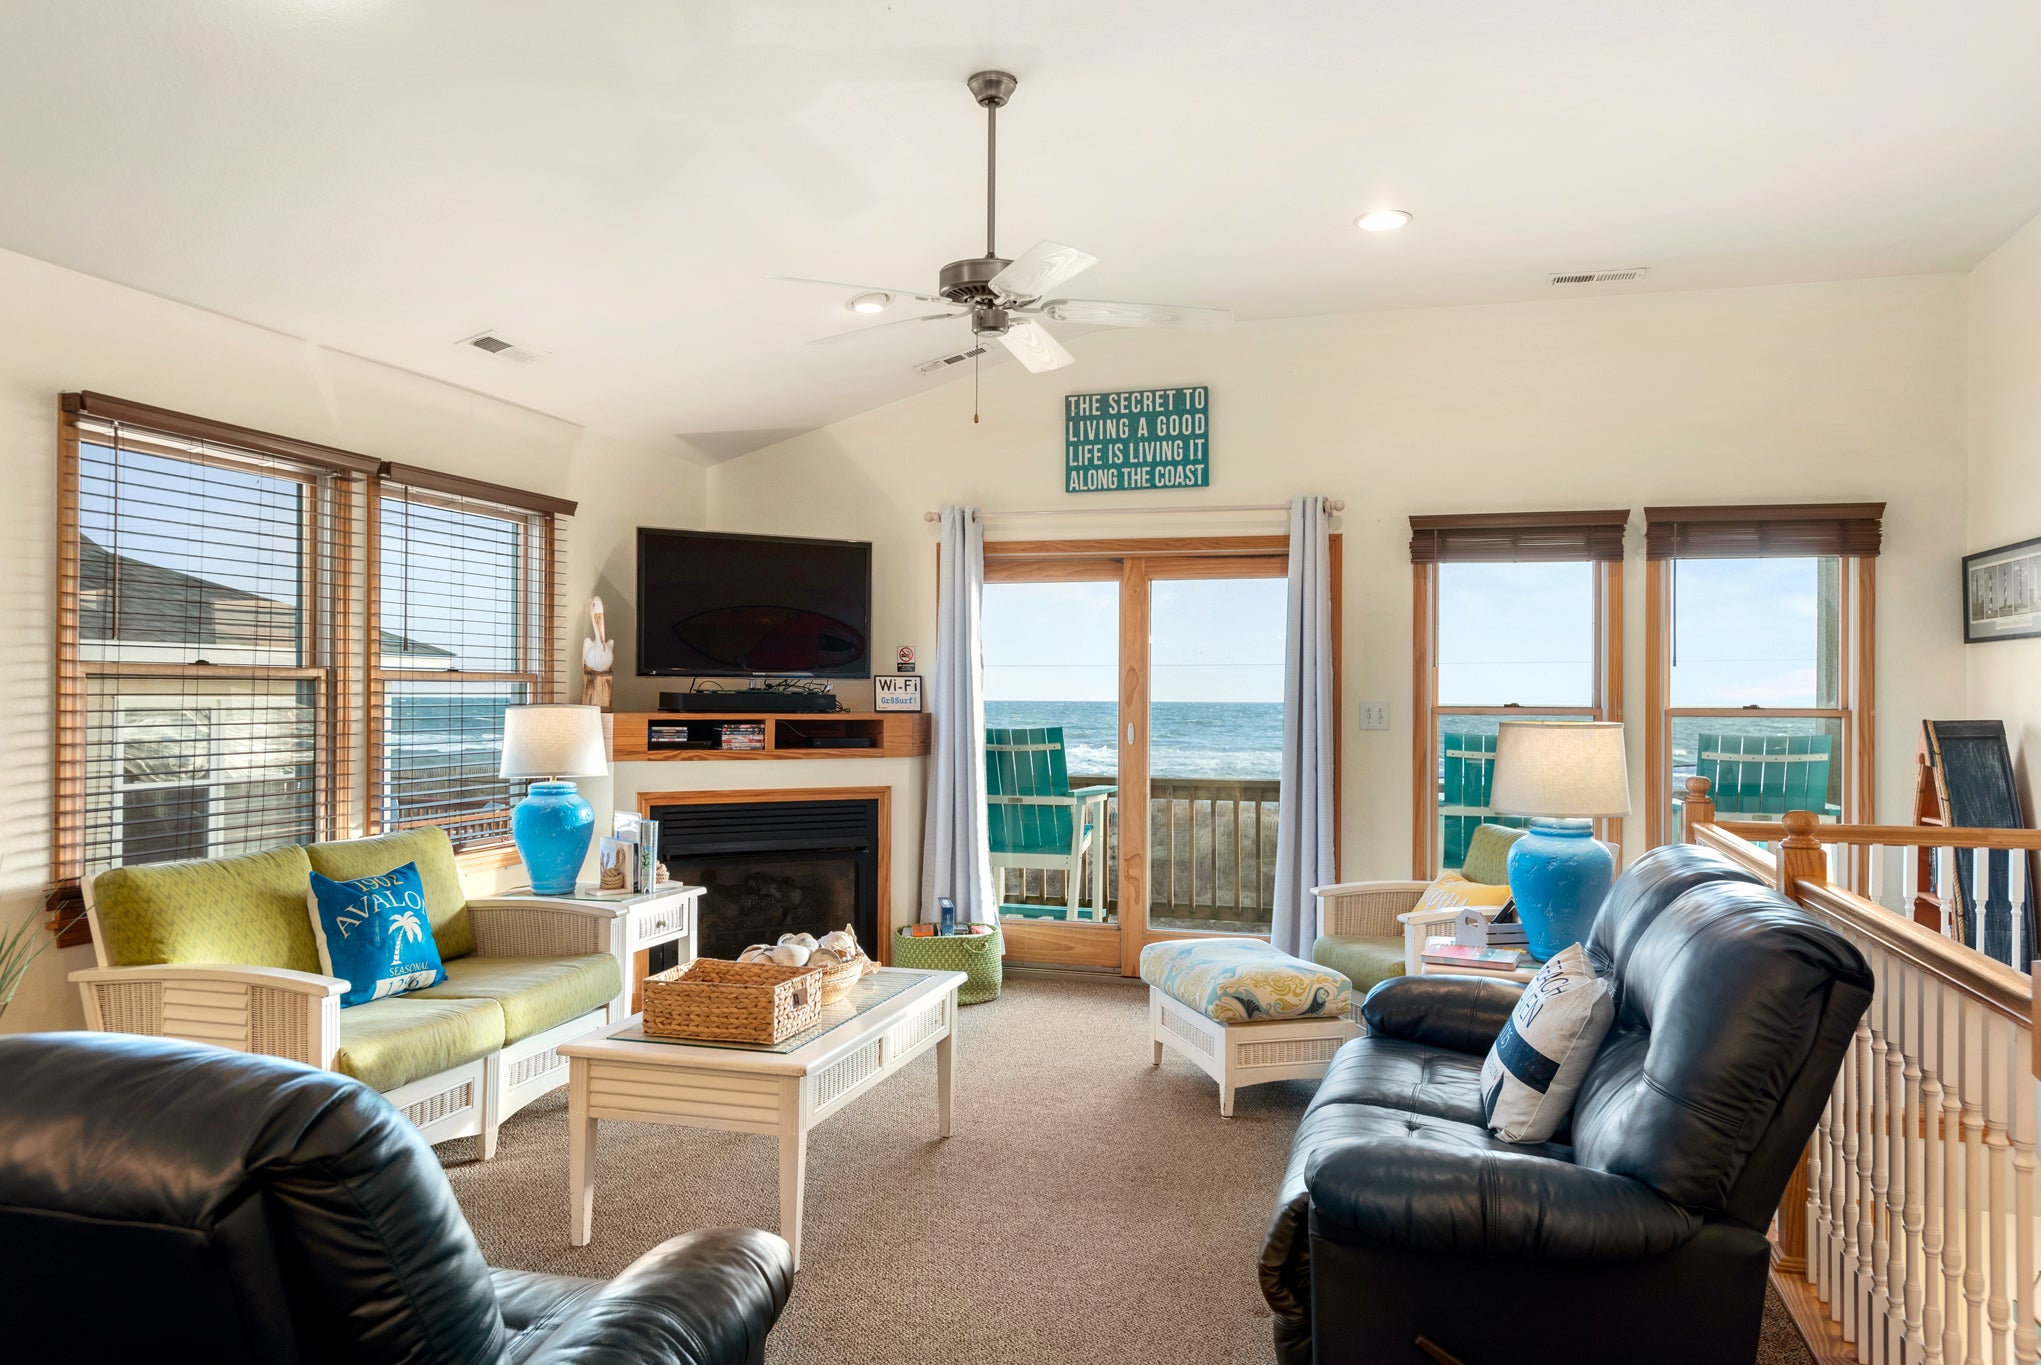 KH3406: Surf's Up | Top Level Living Area - Fireplace Not Available For Guest Use